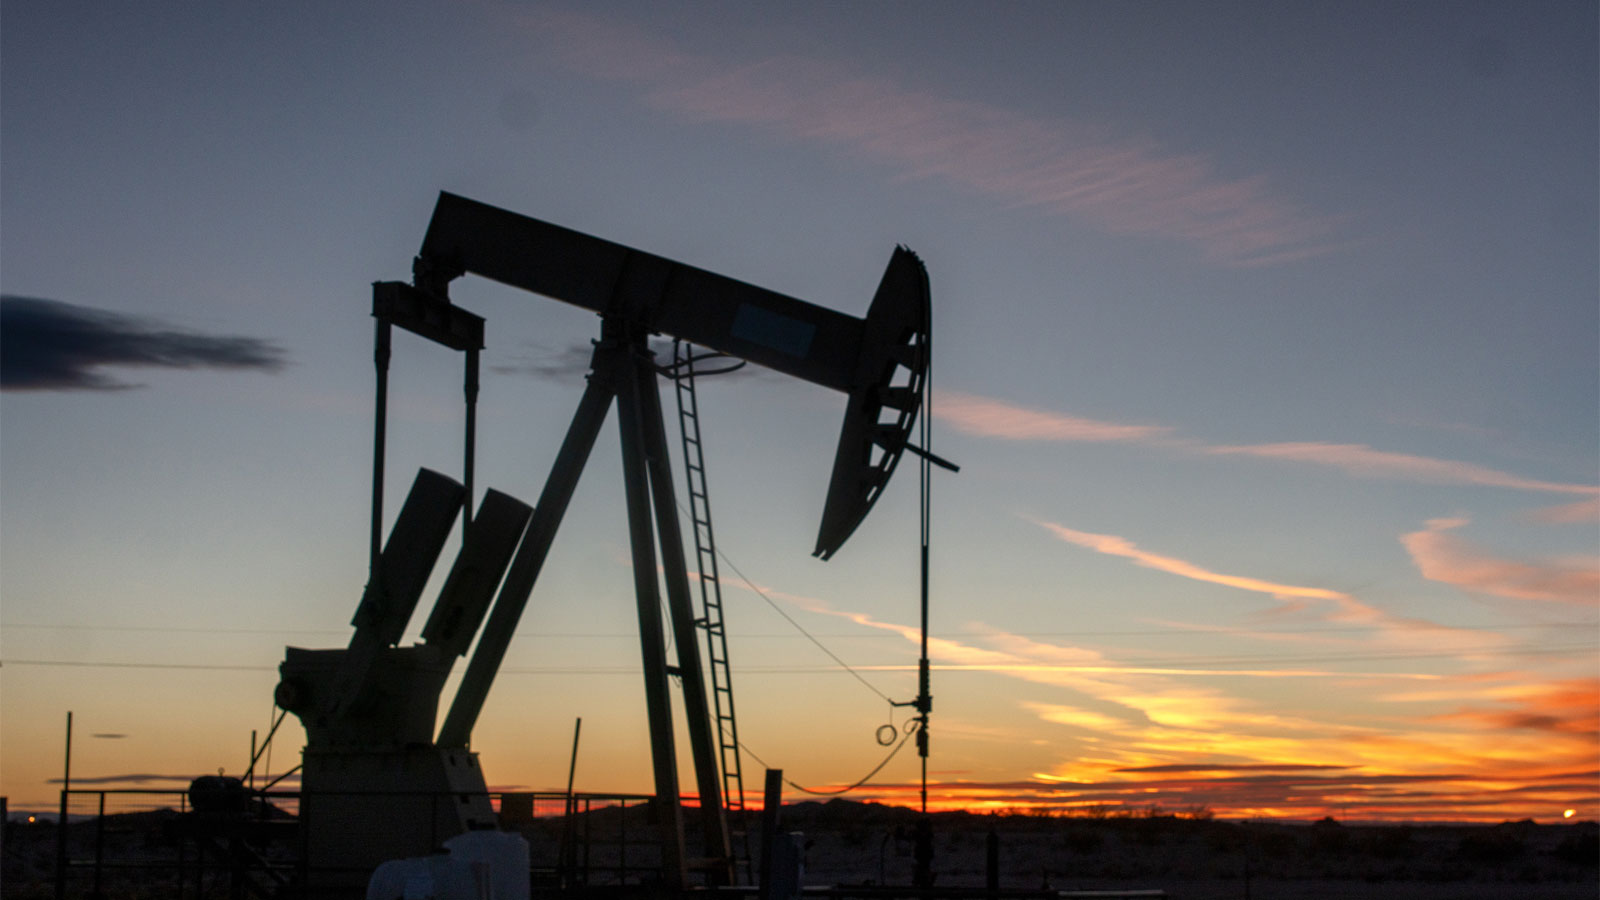 Black silhouette of oil pumpjack with orange sunset in background